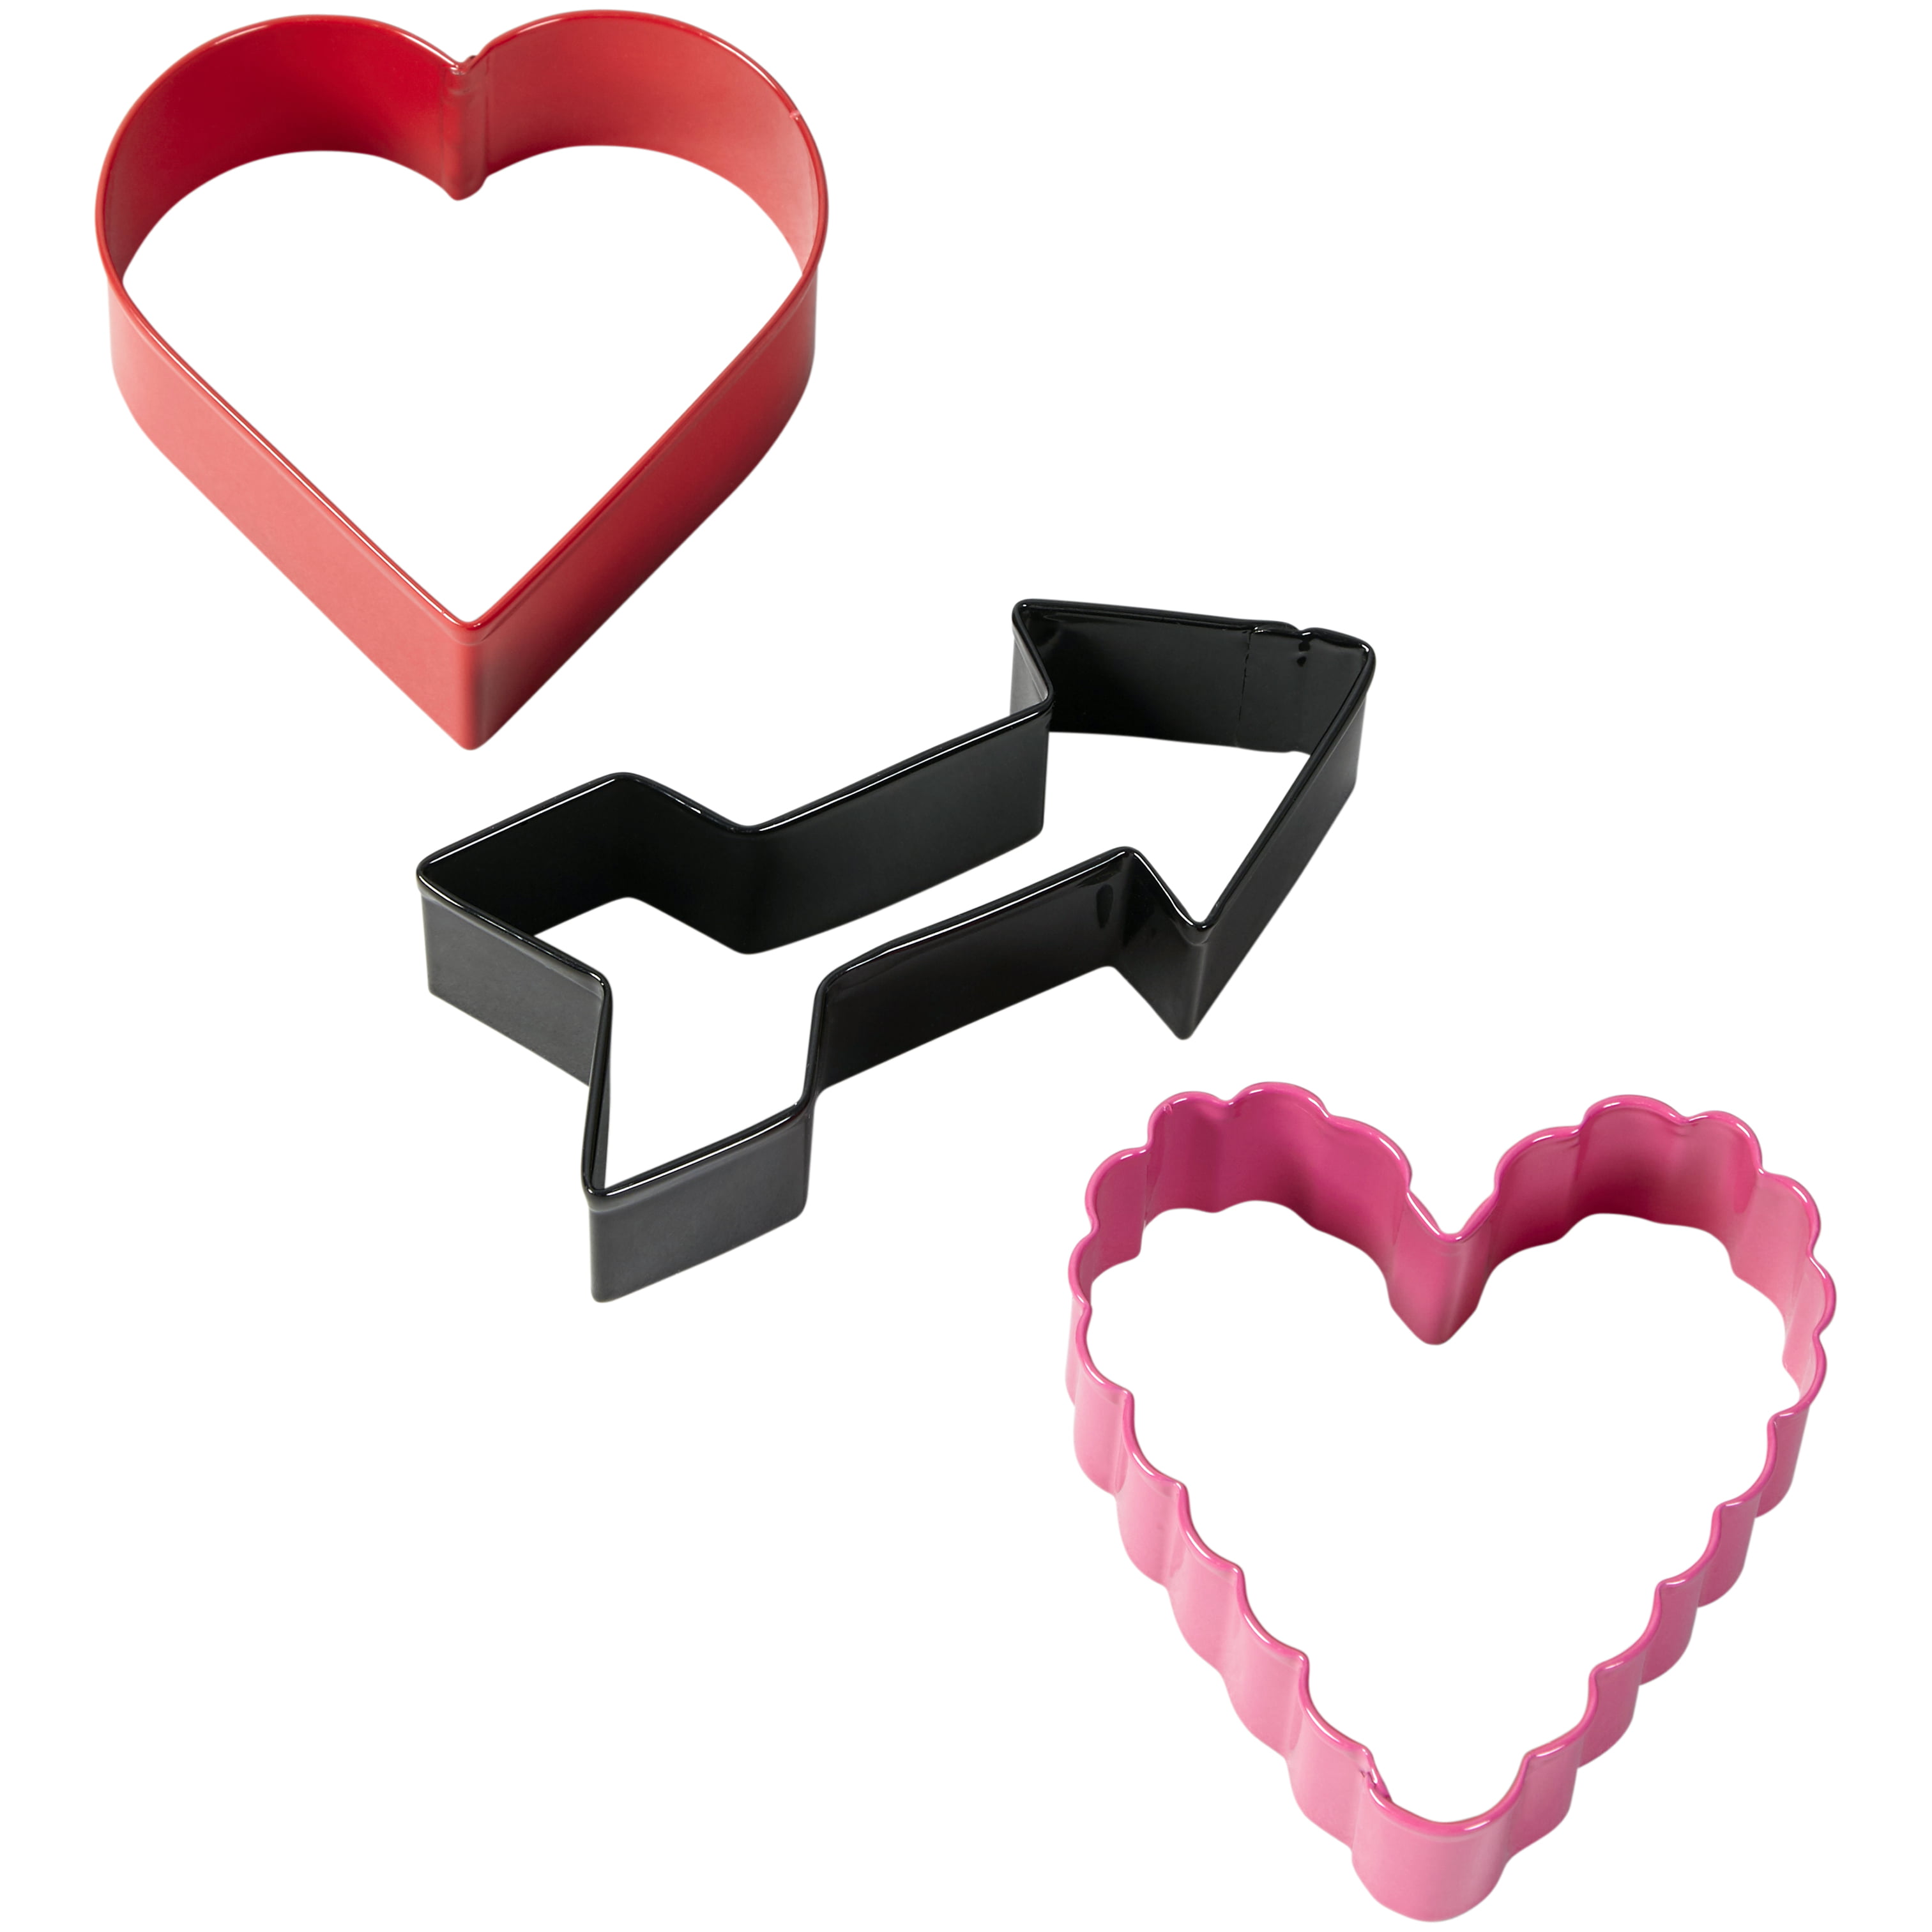 Details about   Wilton Valentine Red Pink White Hearts Arrow Mini Cookie Cutters BNWTS! 